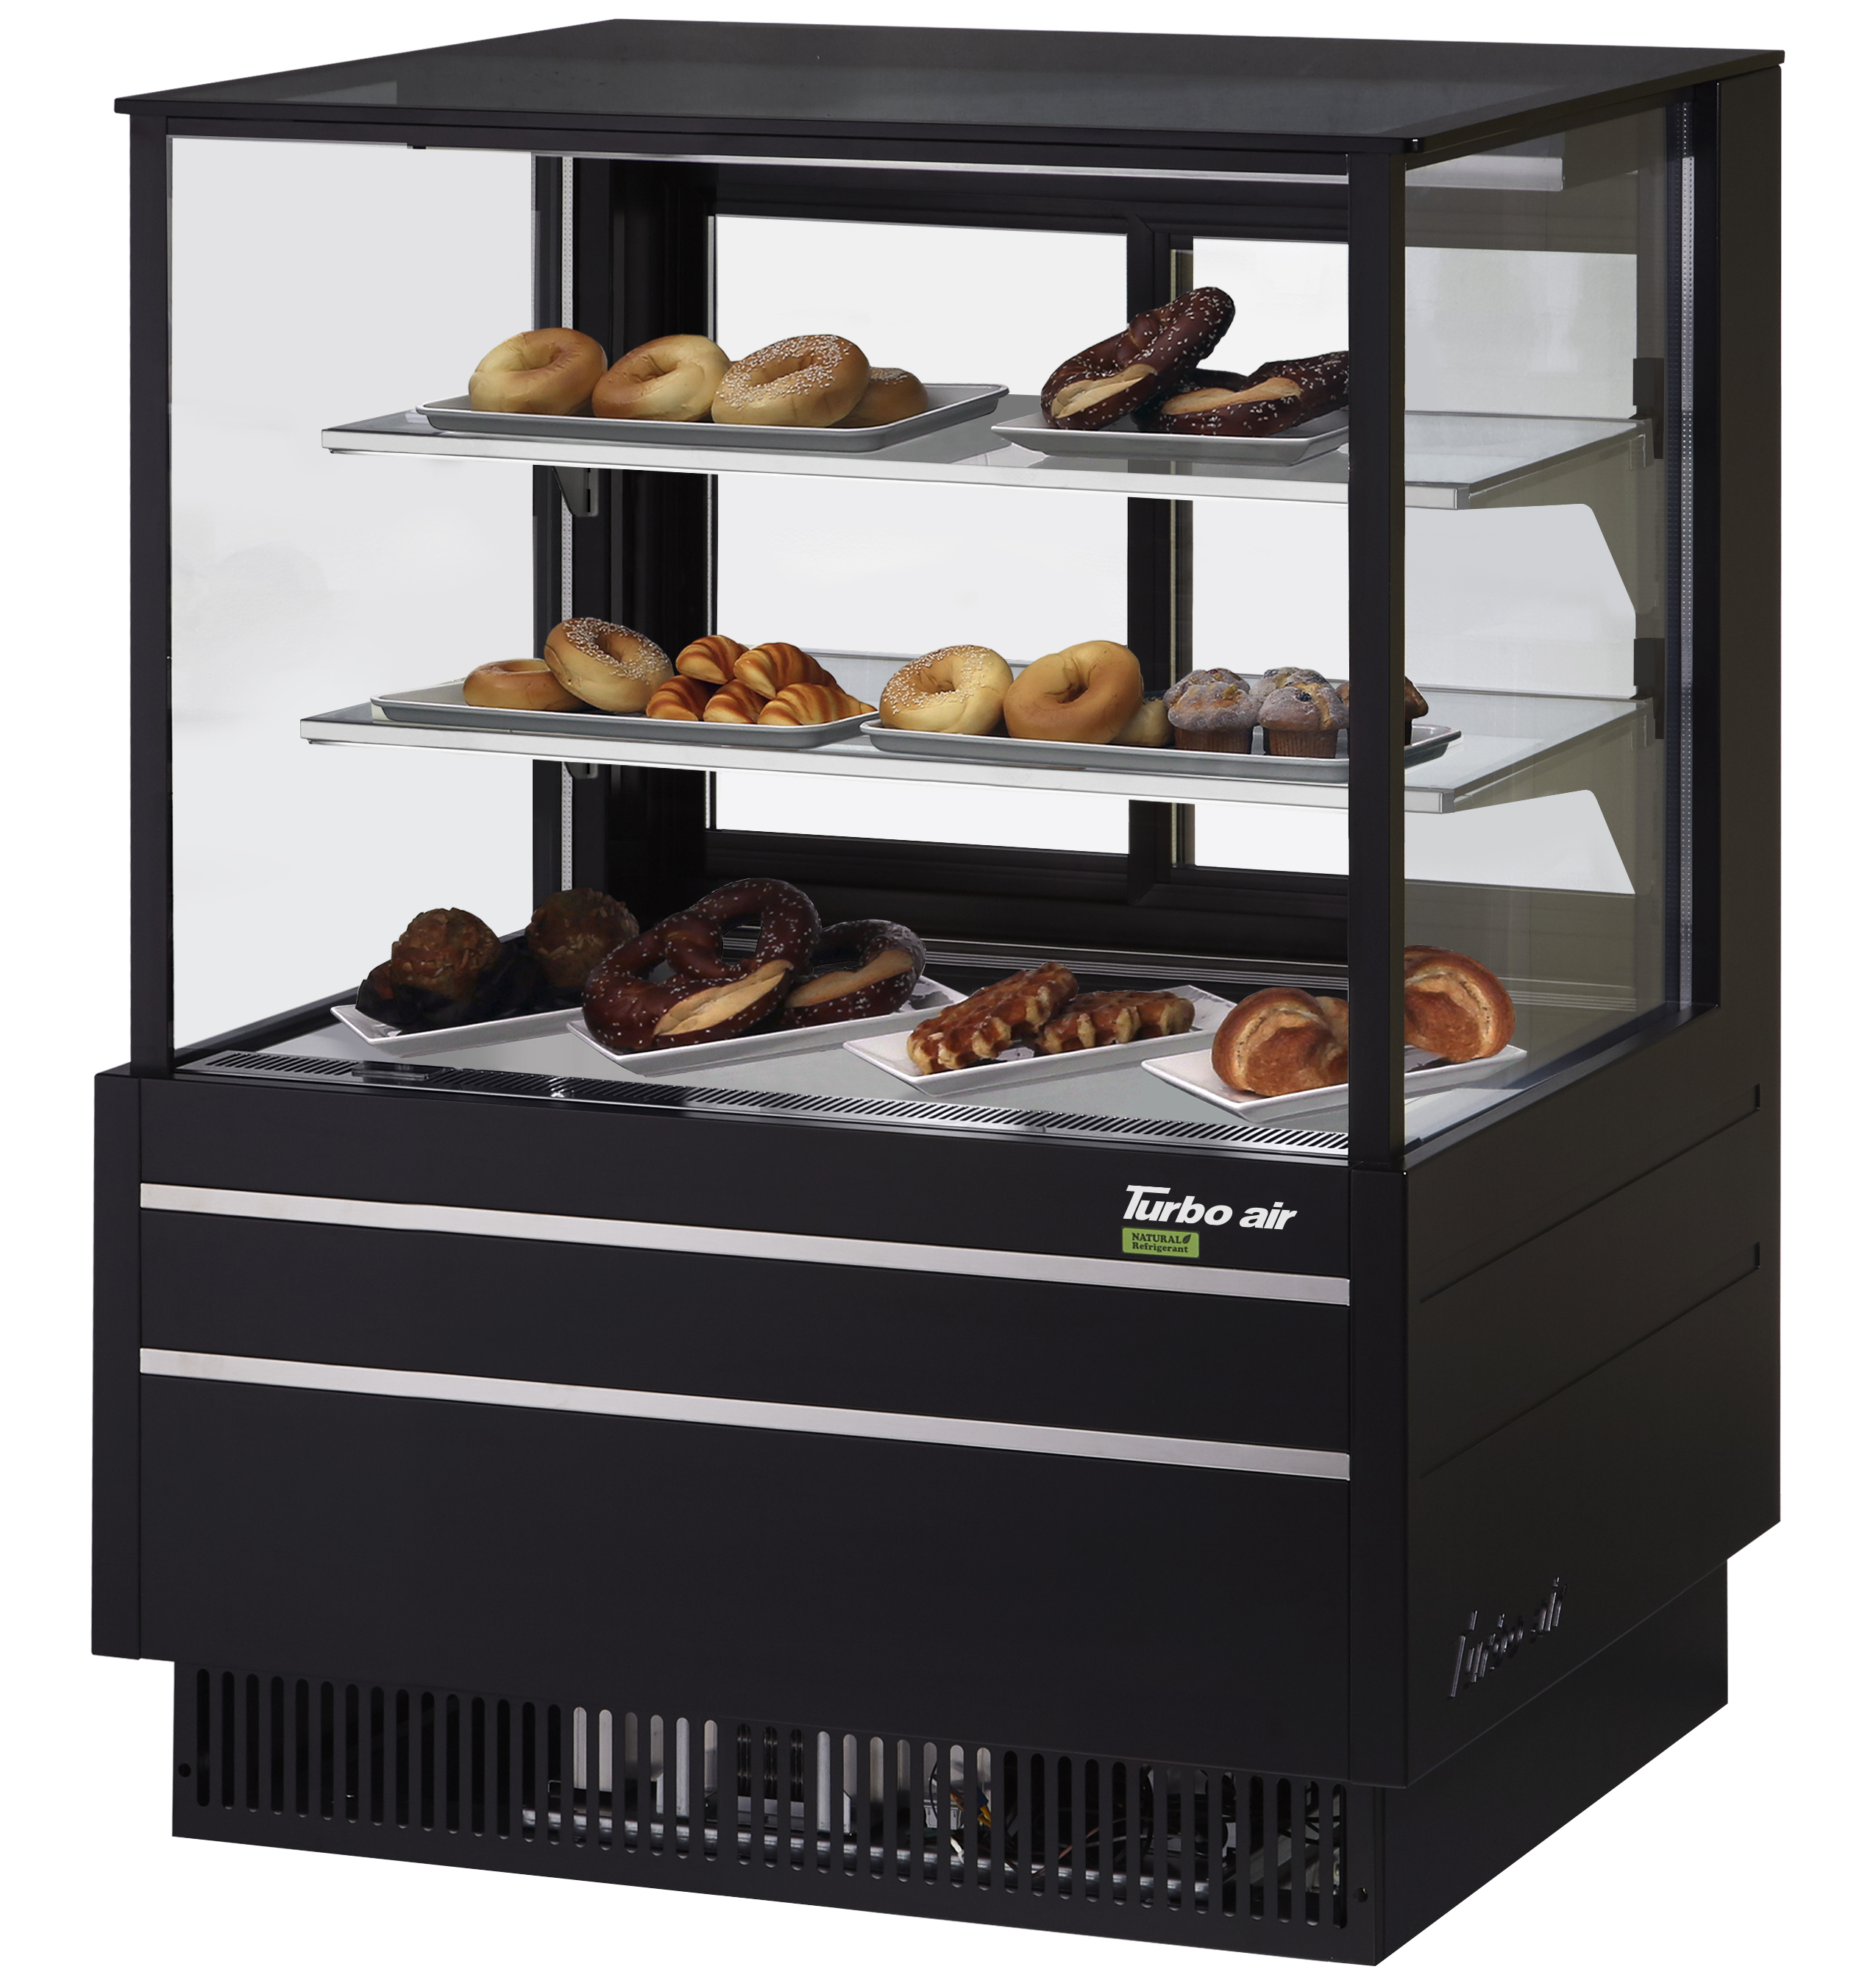 Turbo Air TCGB-36UF-DR-W(B) Non-Refrigerated Bakery Display Case